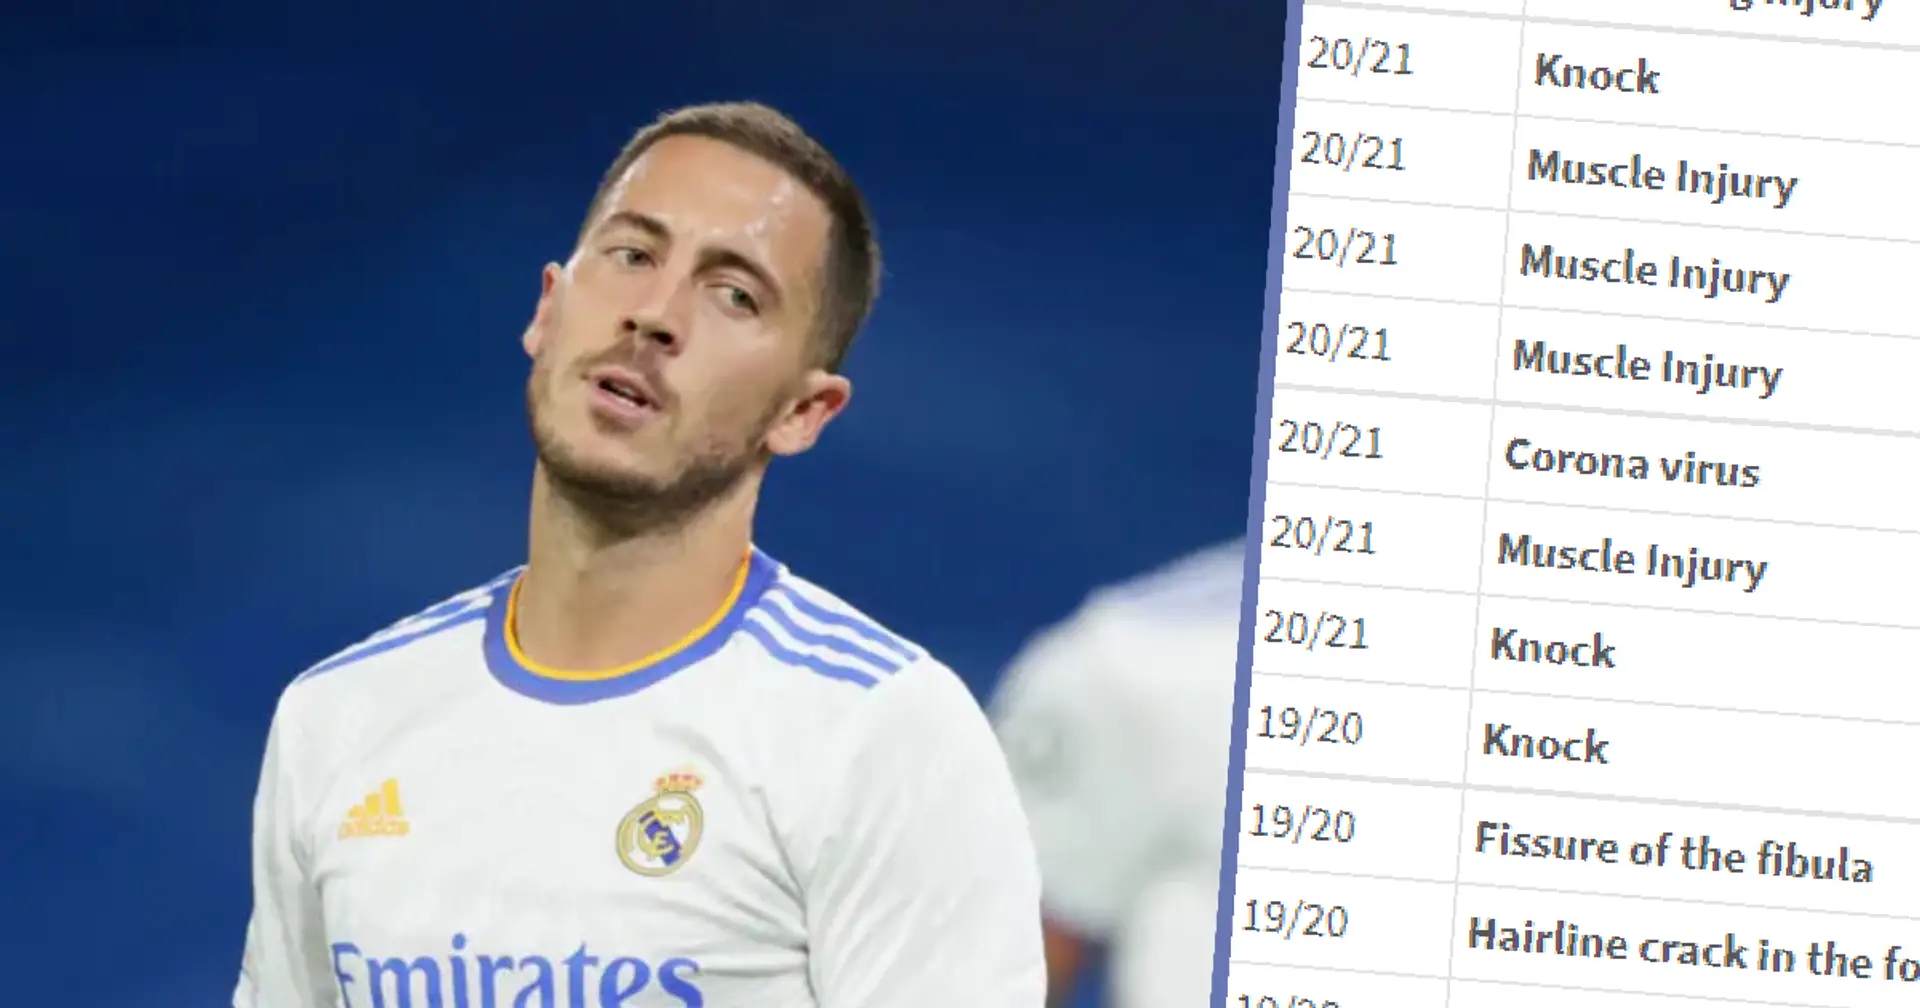 Teammate says Hazard 'avoids contact' in games as injuries affect playing style